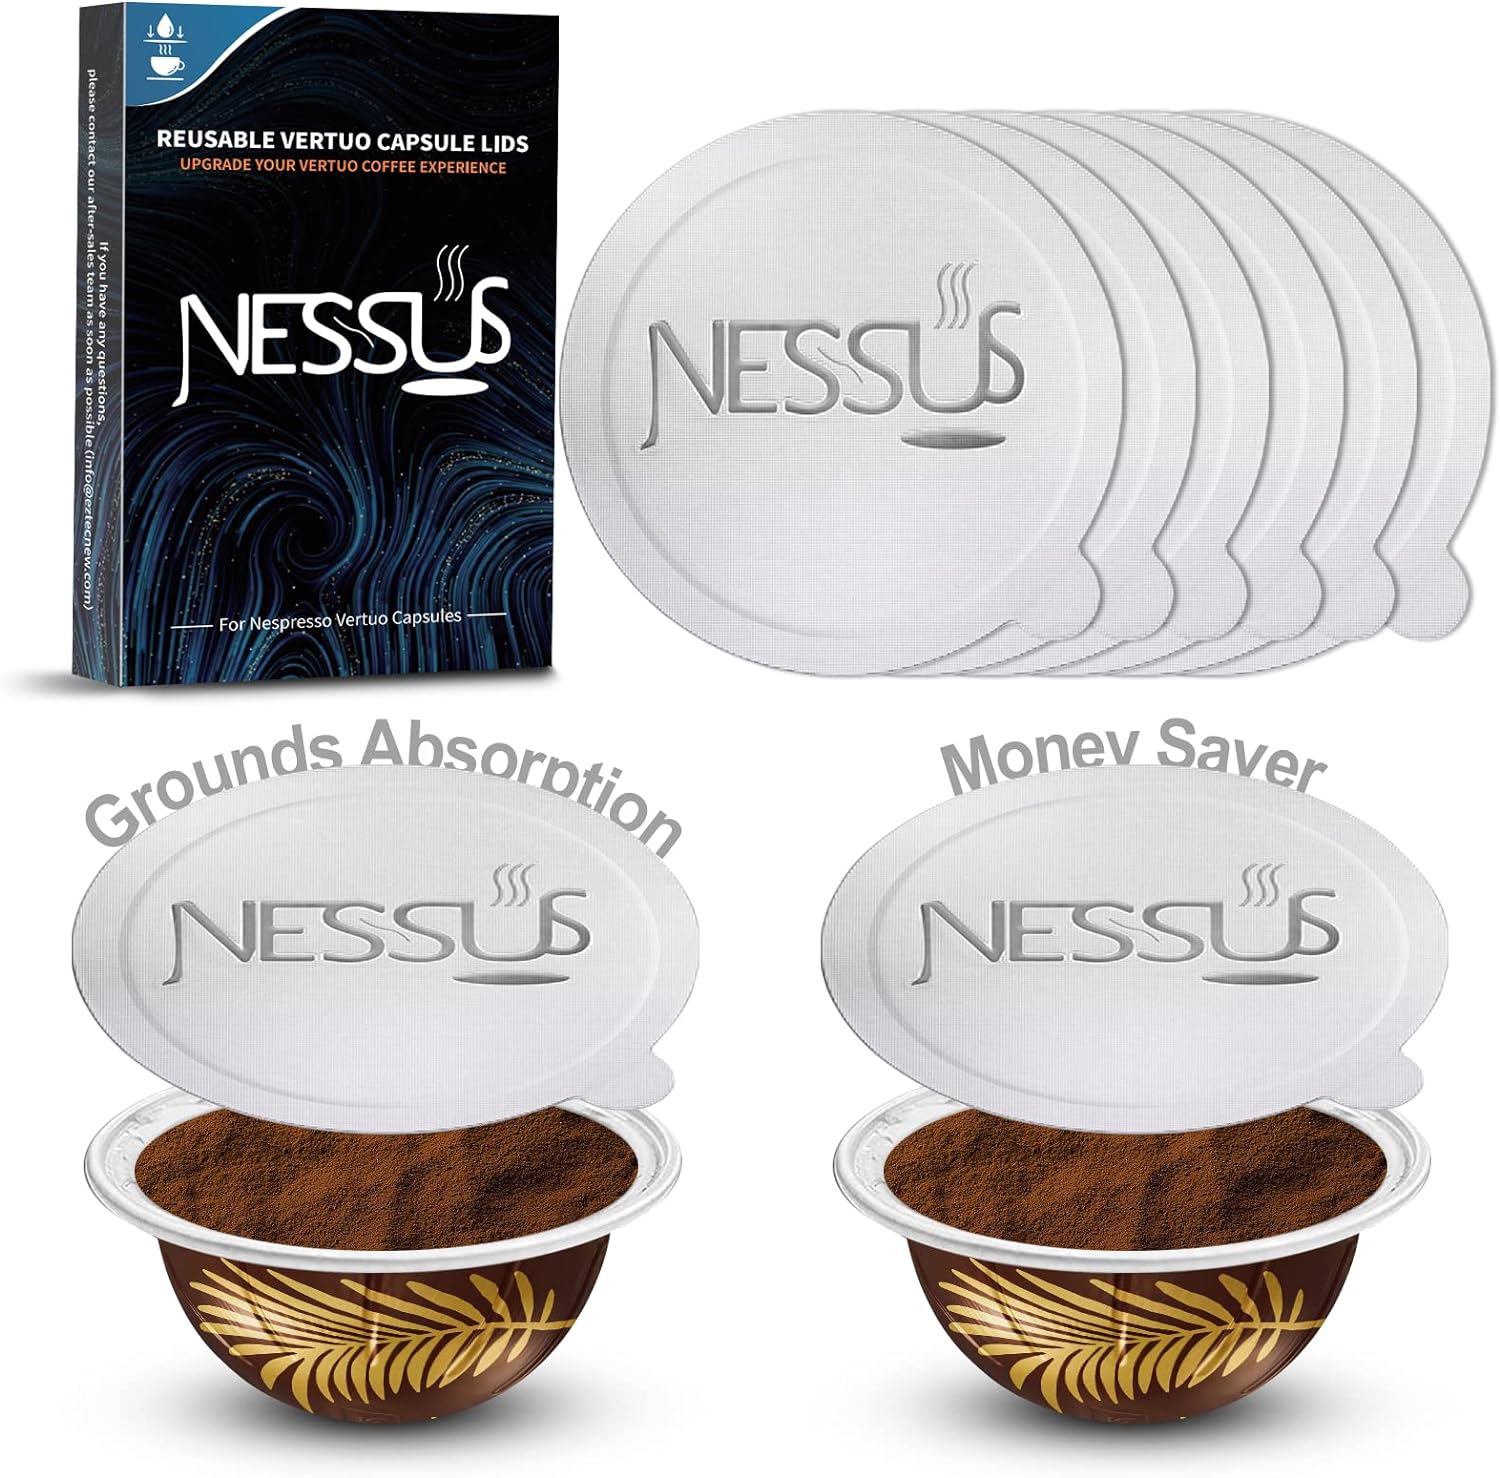 Nessus Foil Seals Lid for Reusable Nespresso Vertuo Pods, Refillable Capsule Aluminum Foil Lids Sticker with Coffee Grounds Absorption Layer, Compatible with Nespresso VertuoLine Machine(60 pcs, 62mm)